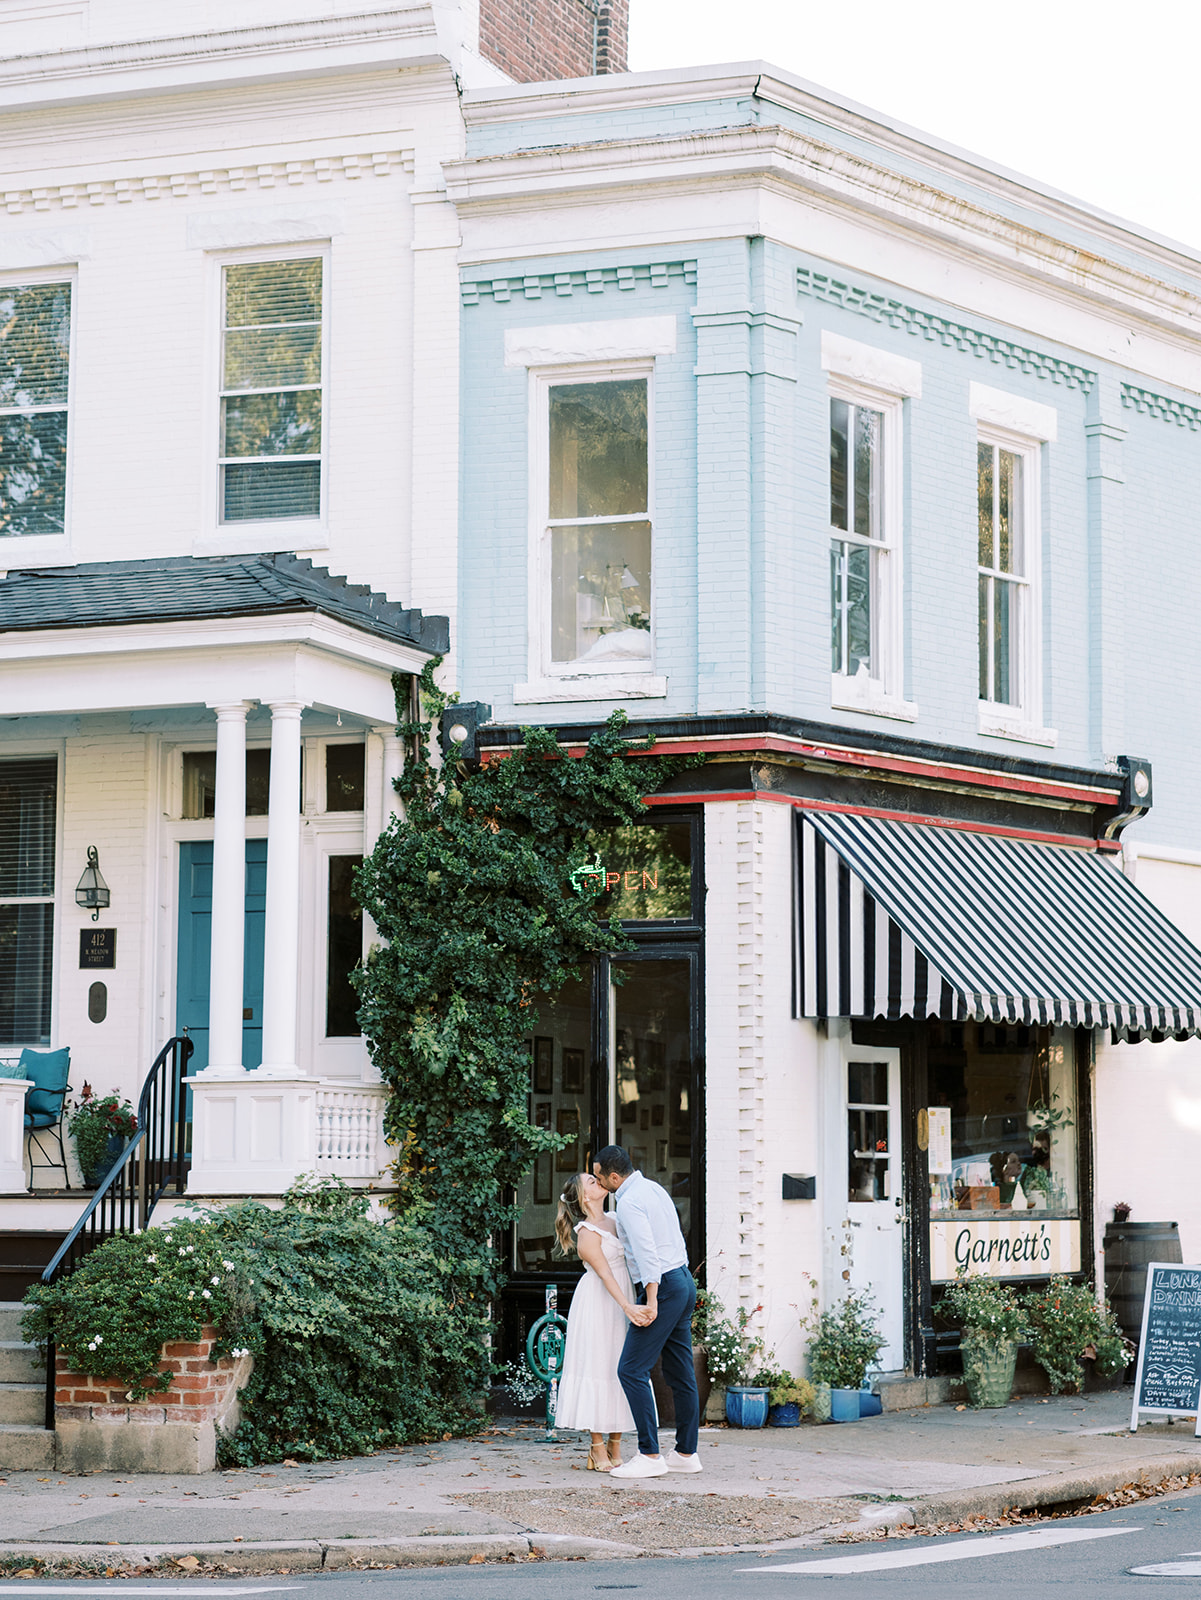 A couple's engagement photo in front of Garnetts Sandwich Shop in Richmond Virginia showing the entire building